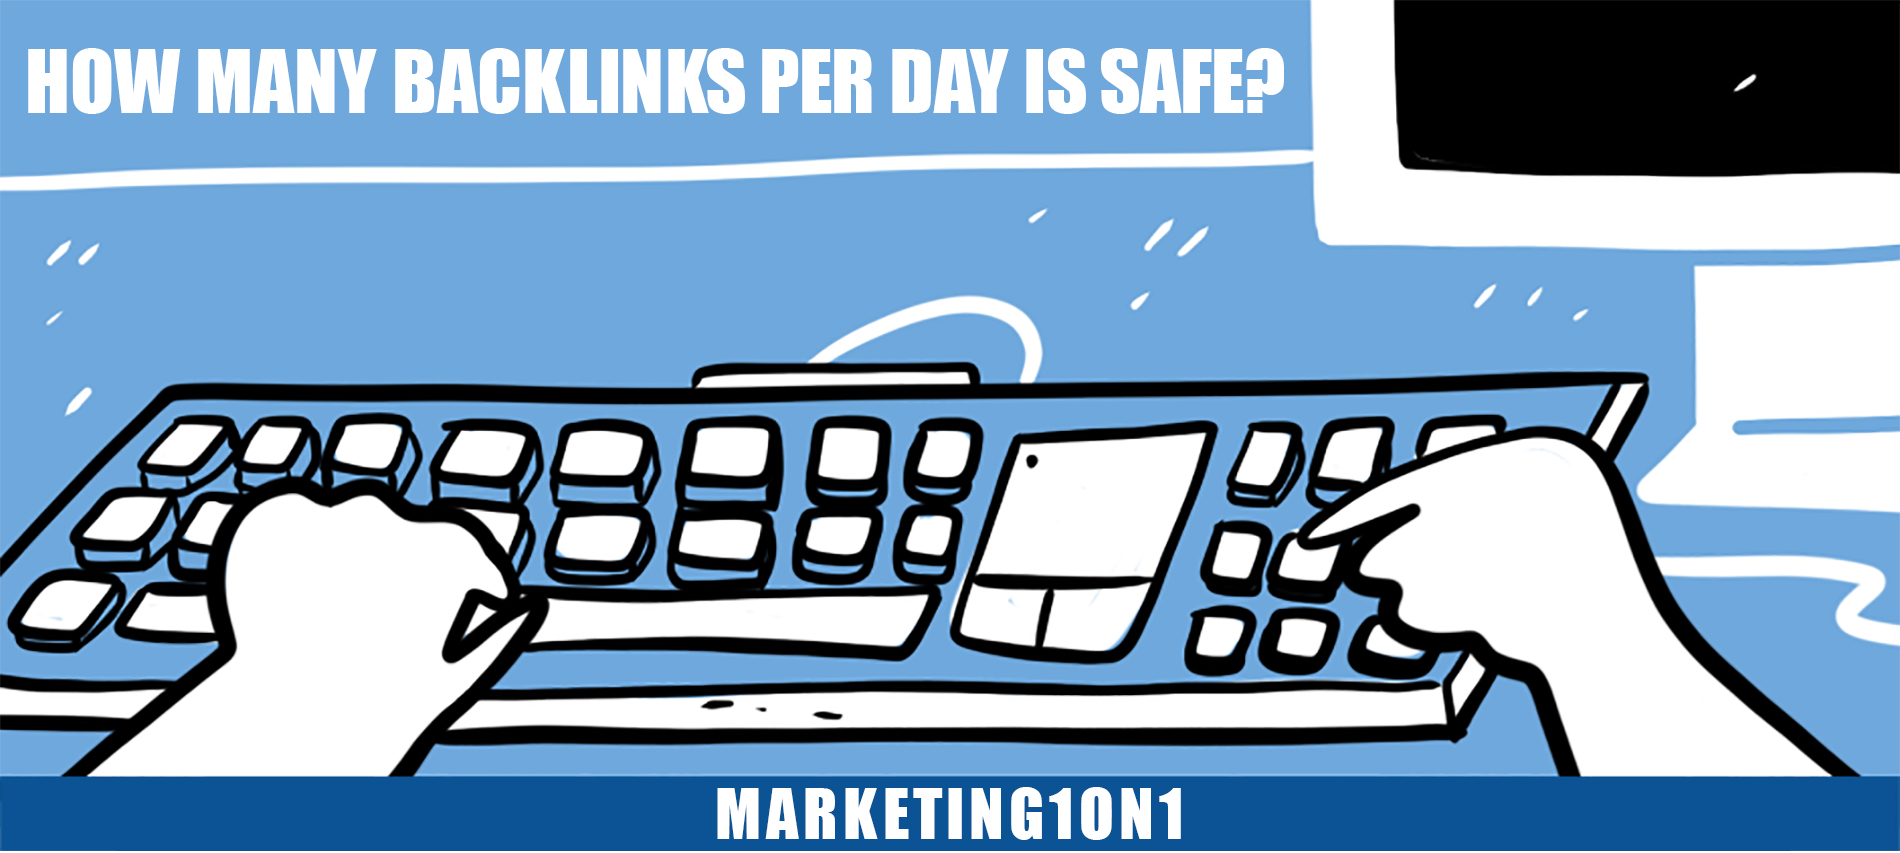 How many backlinks per day is safe?